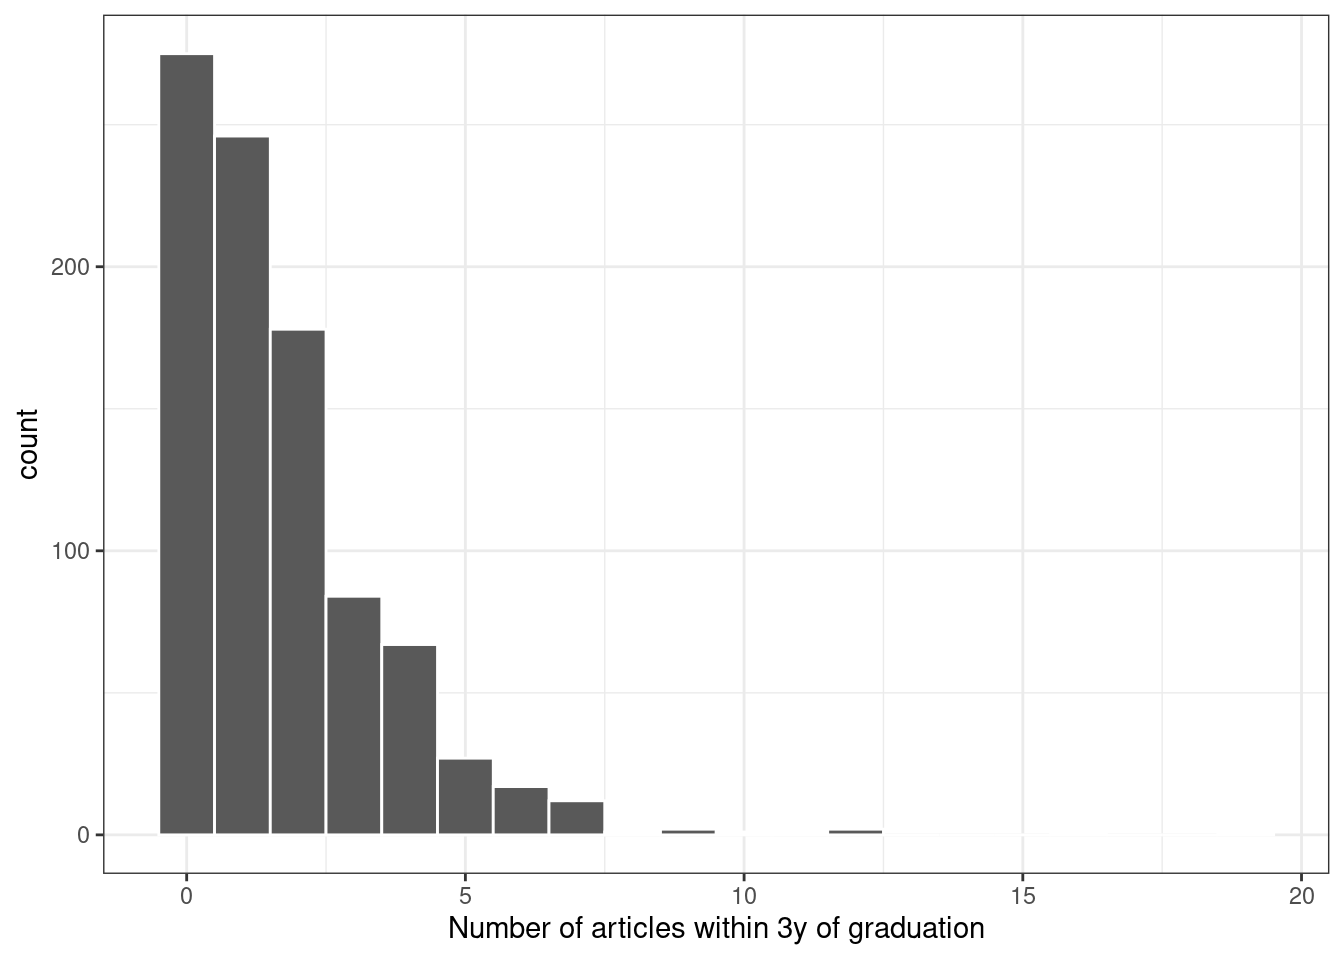 The distribution of the number of articles written within 3 years of graduation. The distribution is right-skewed and most of the data have counts of zero or one.